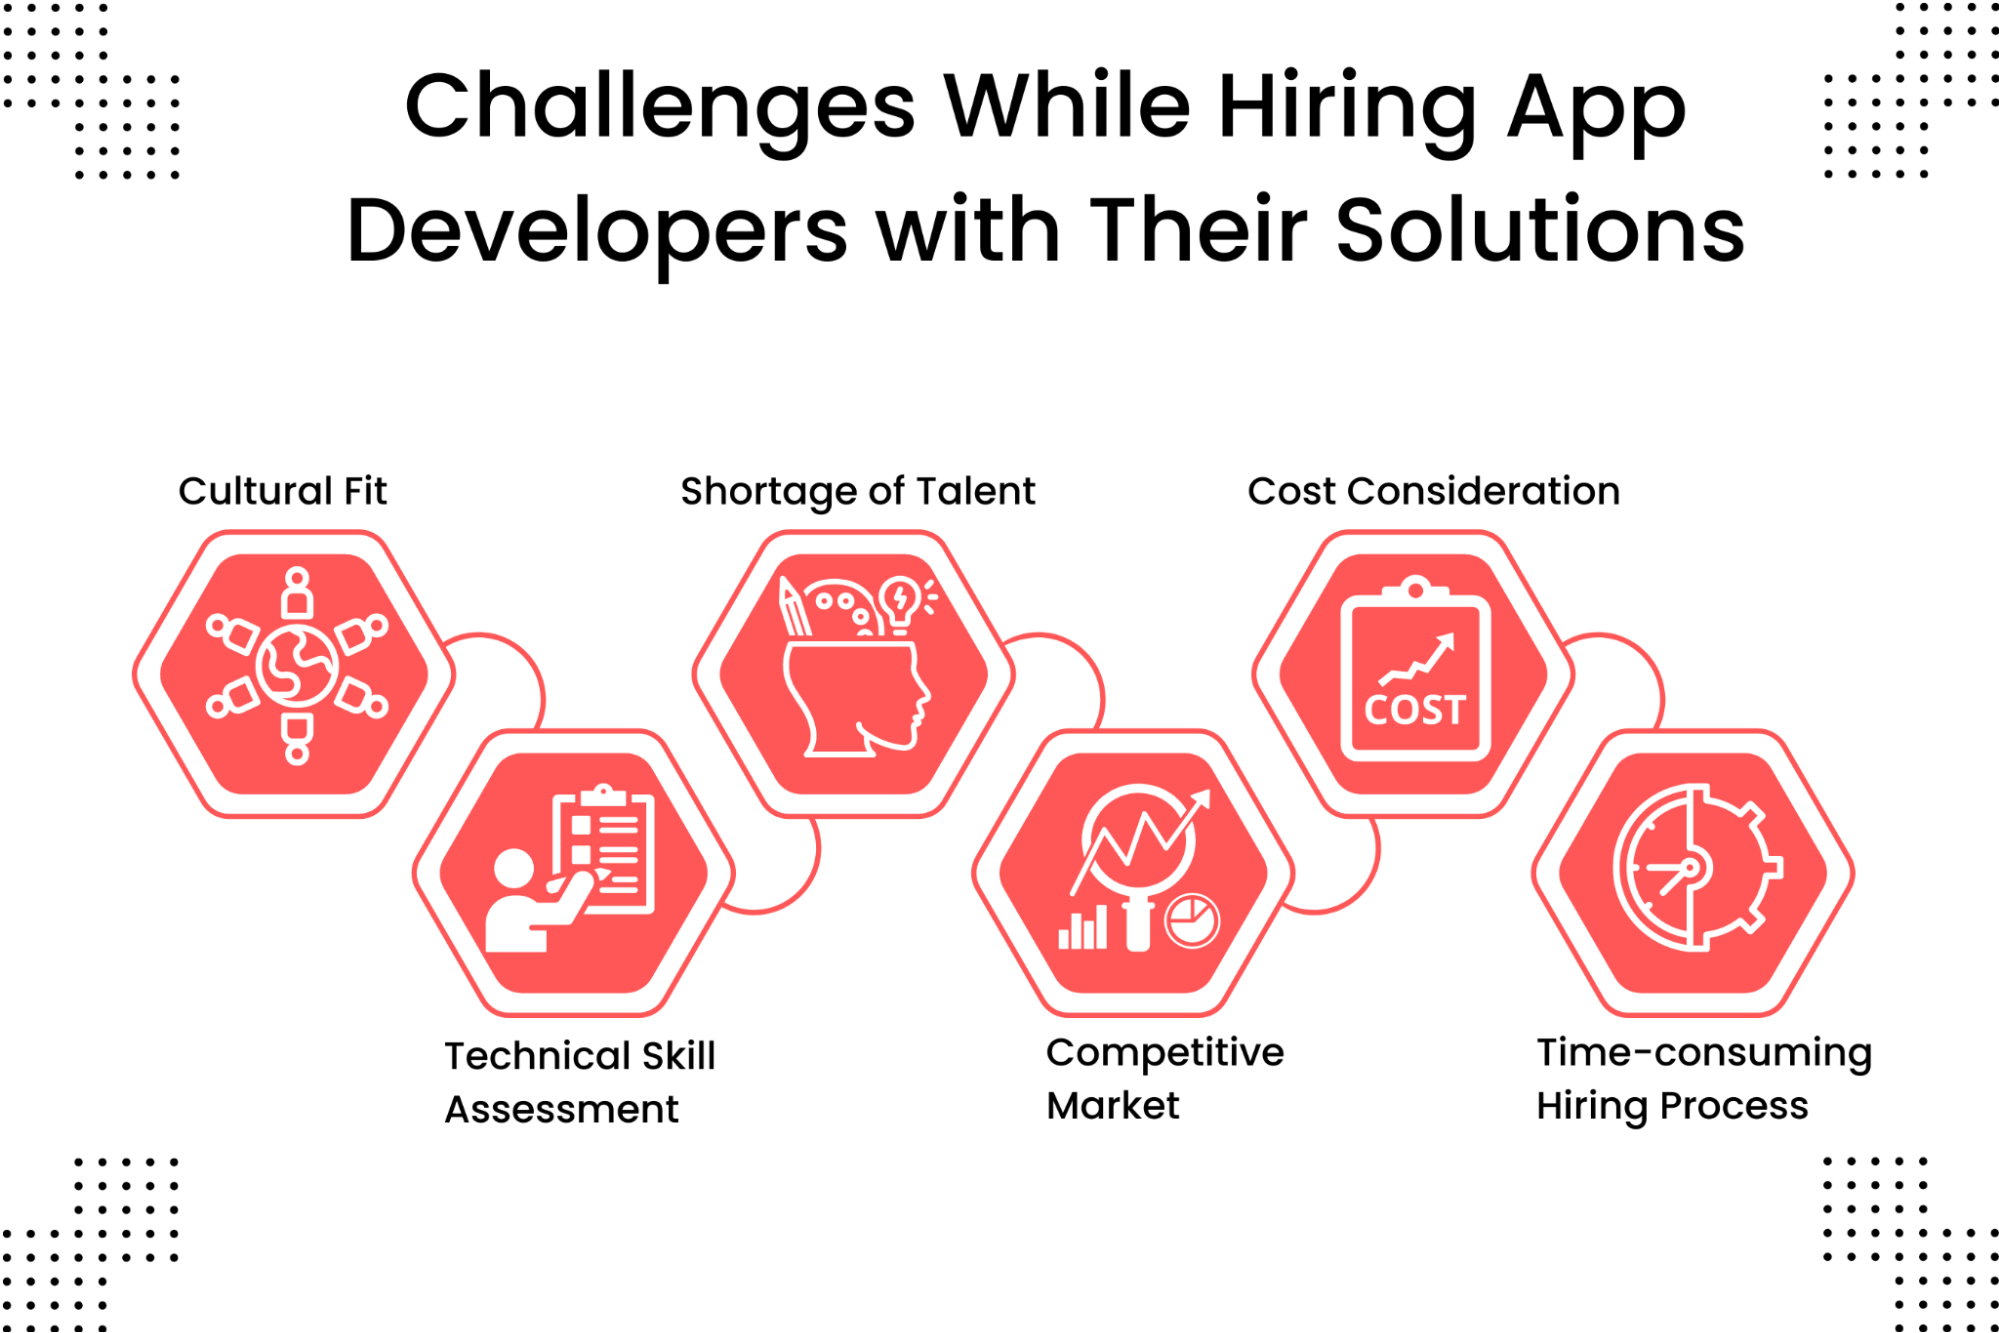 Challenges While Hiring App Developers with Their Solutions